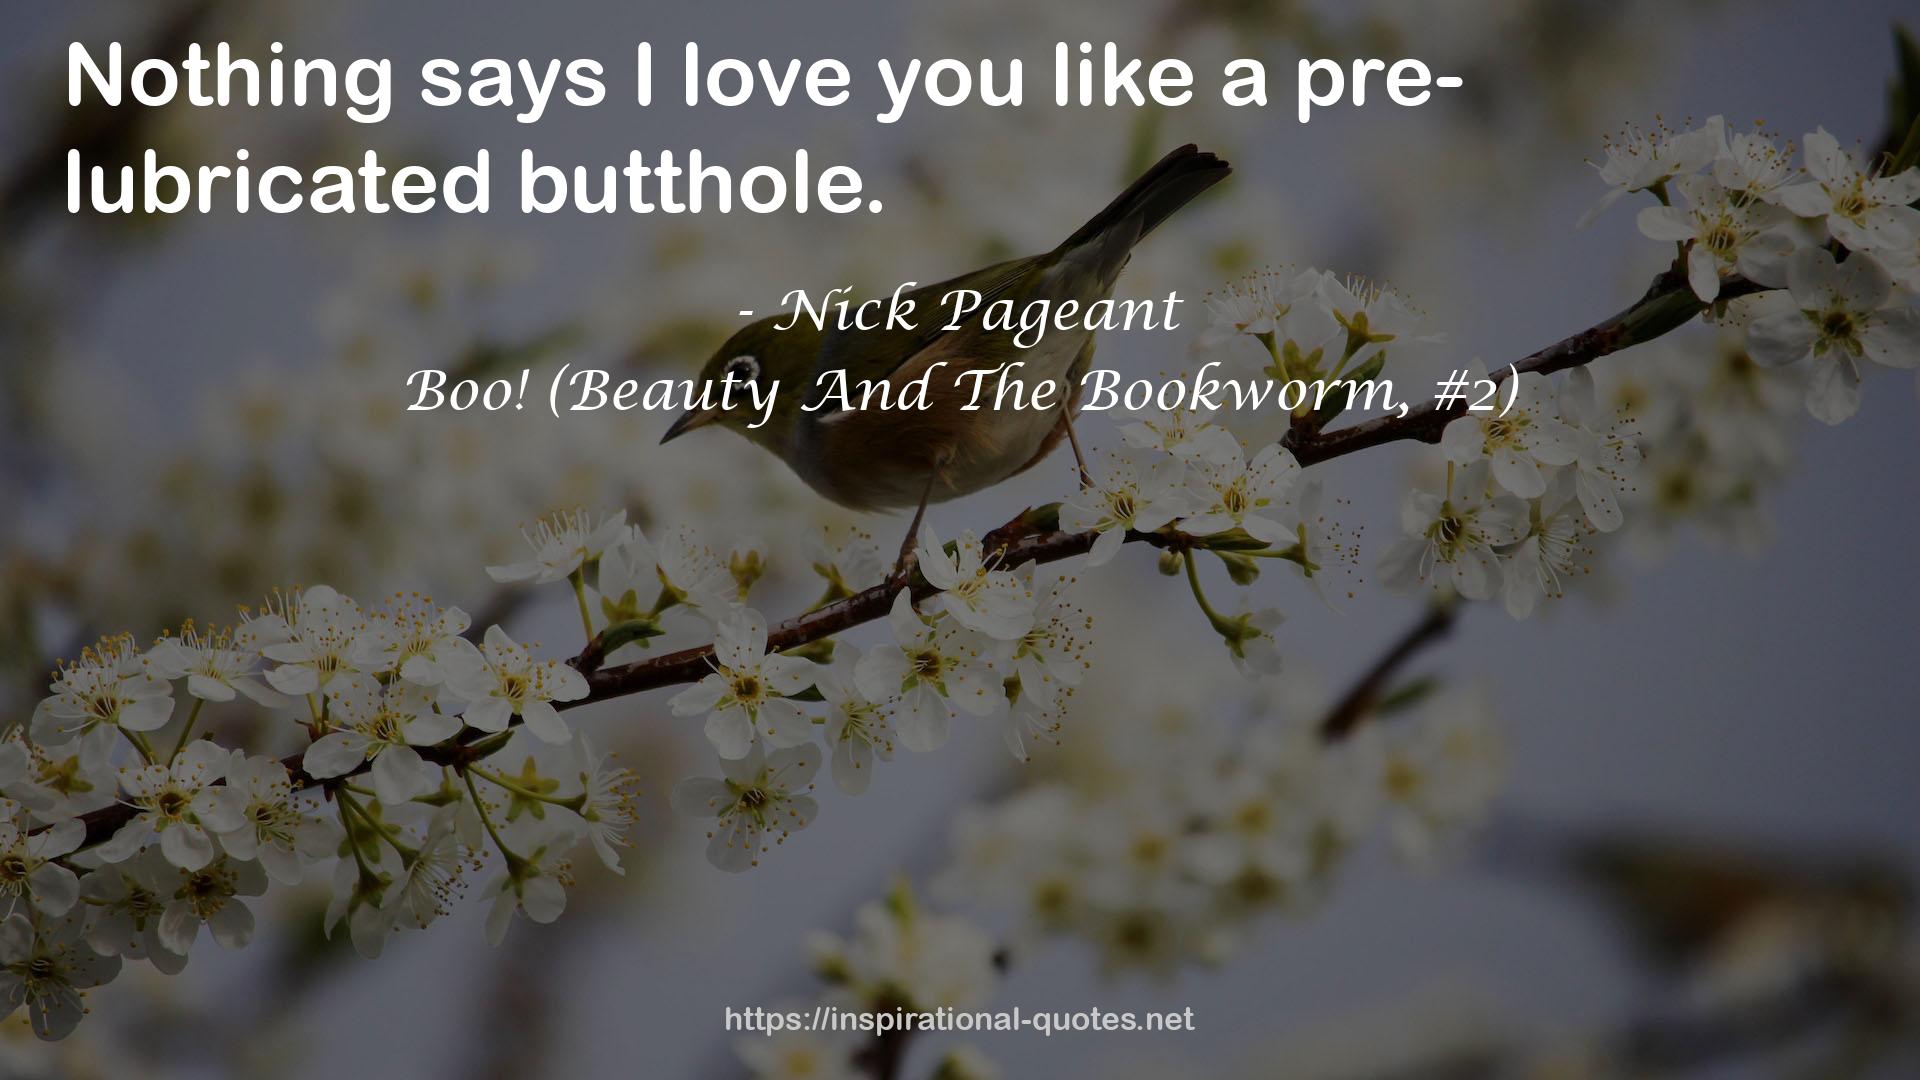 Boo! (Beauty And The Bookworm, #2) QUOTES